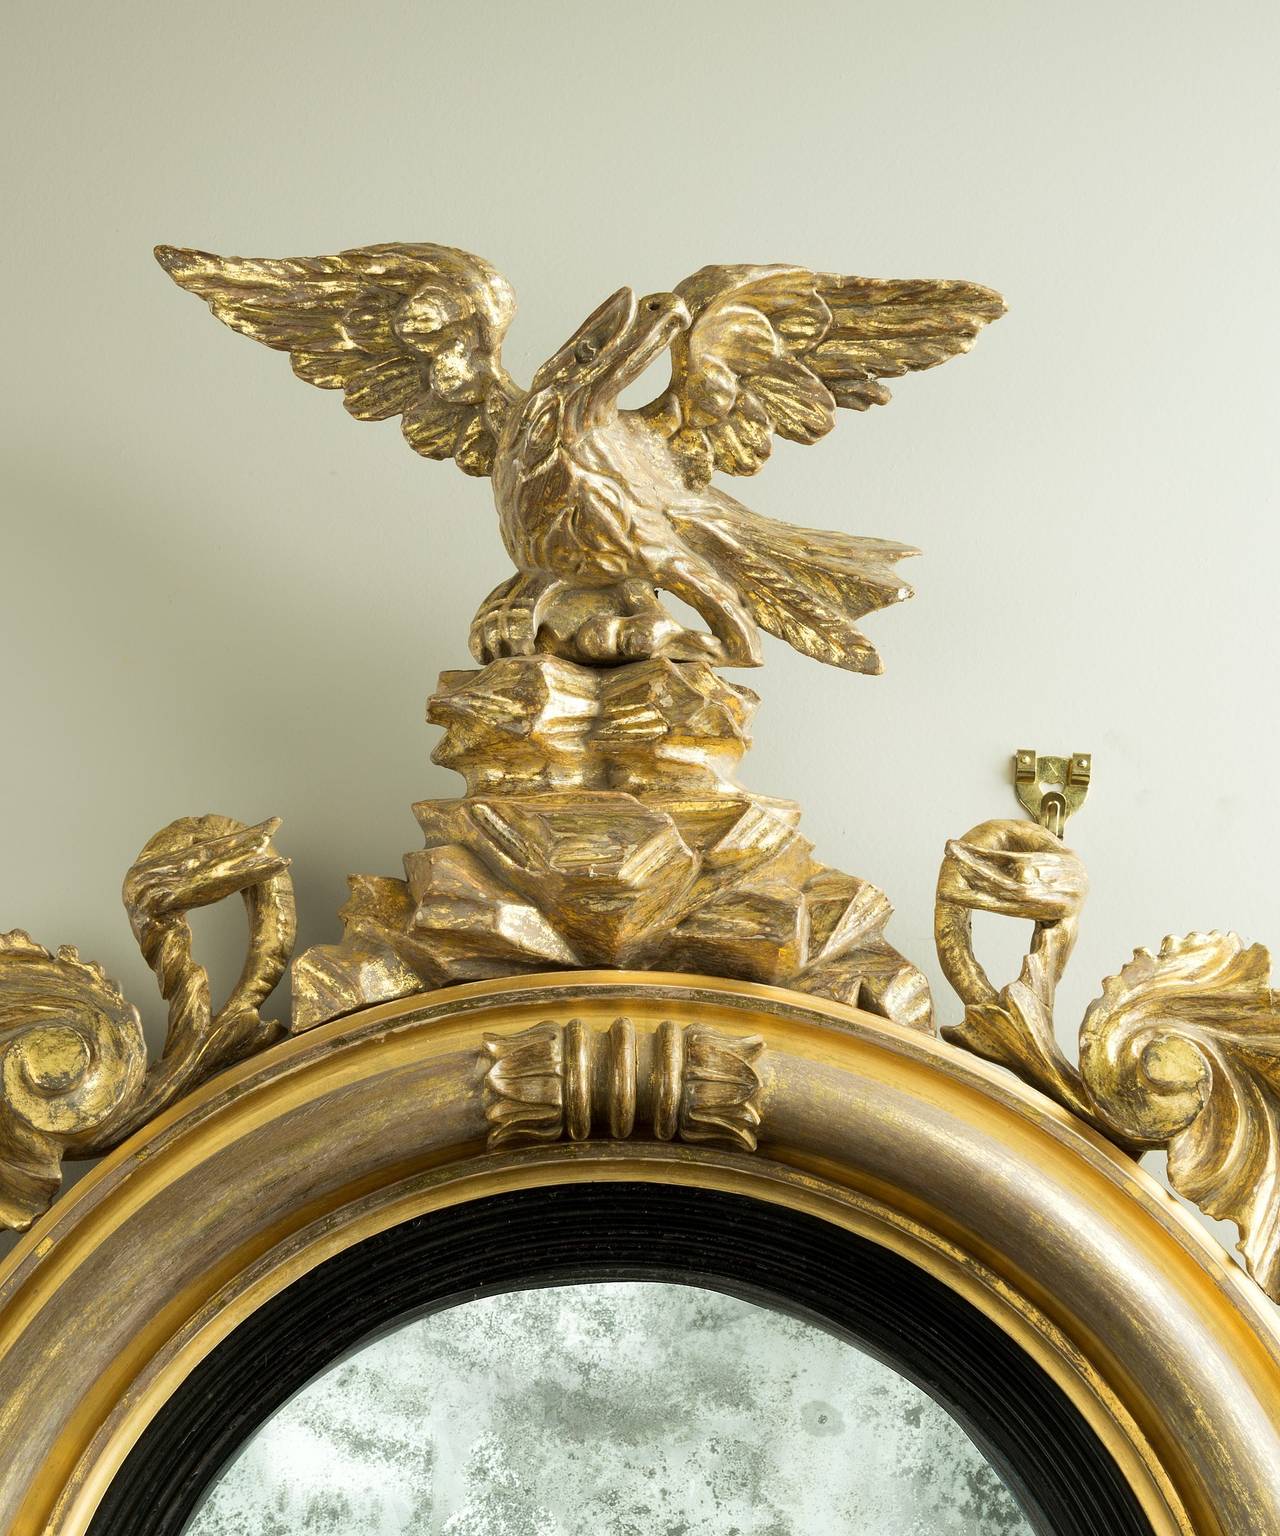 A Regency period carved giltwood convex mirror; the original convex mirror plate set within a reeded ebonised slip and a carved giltwood frame which is decorated with lotus leaves; the frame is surmounted by an eagle flanked by snakes standing on a